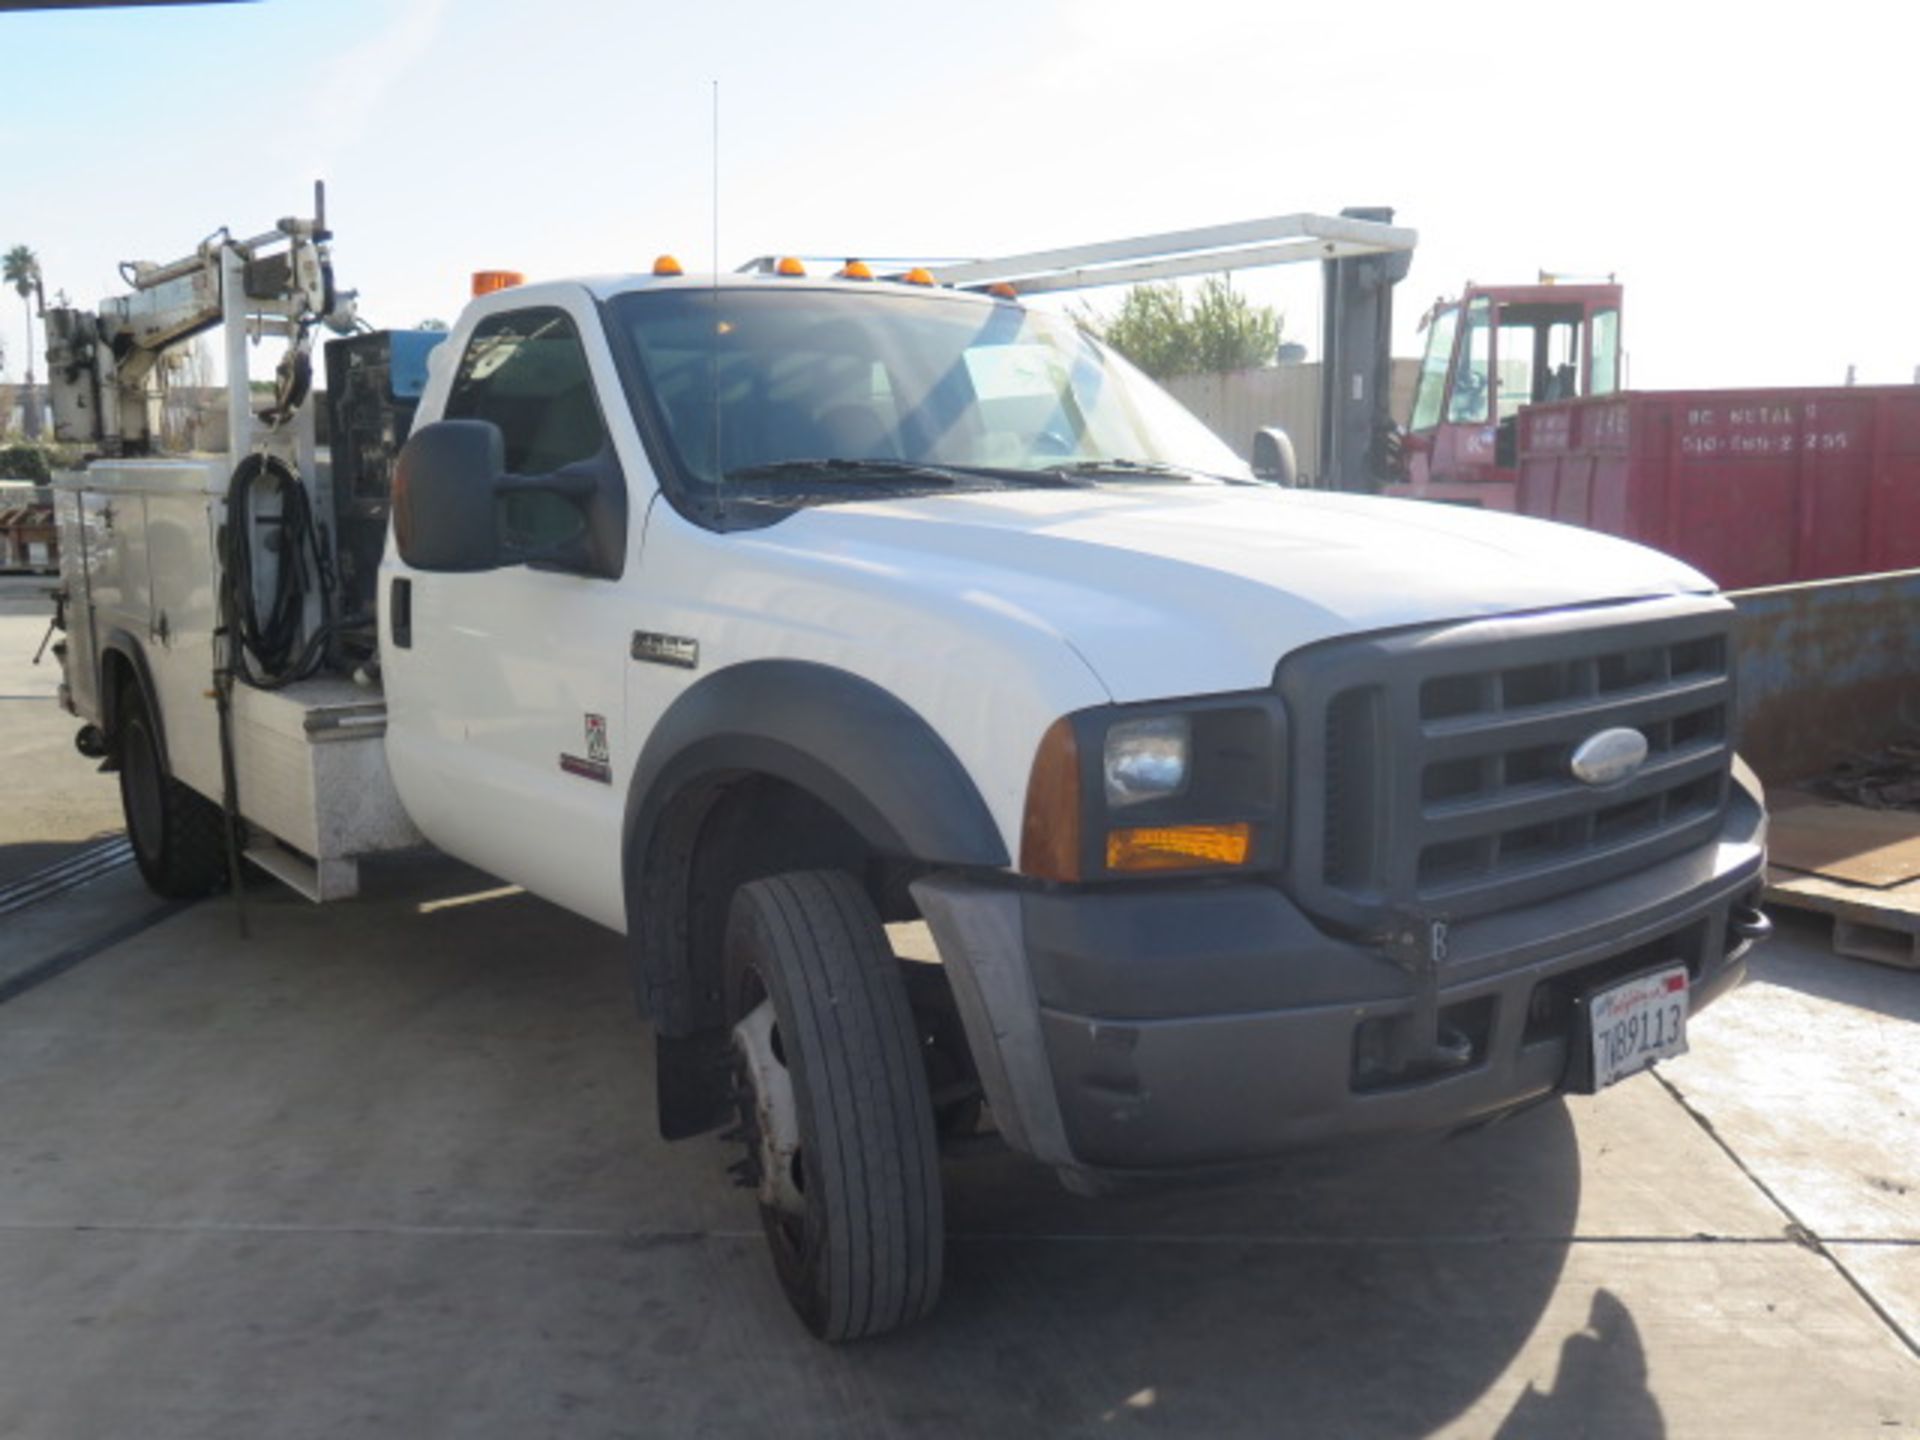 2012 Ford F-550 XL Super Duty 4X4 Service Welding Truck Lisc# 7W89113 w/ Turbo Diesel, SOLD AS IS - Image 3 of 42